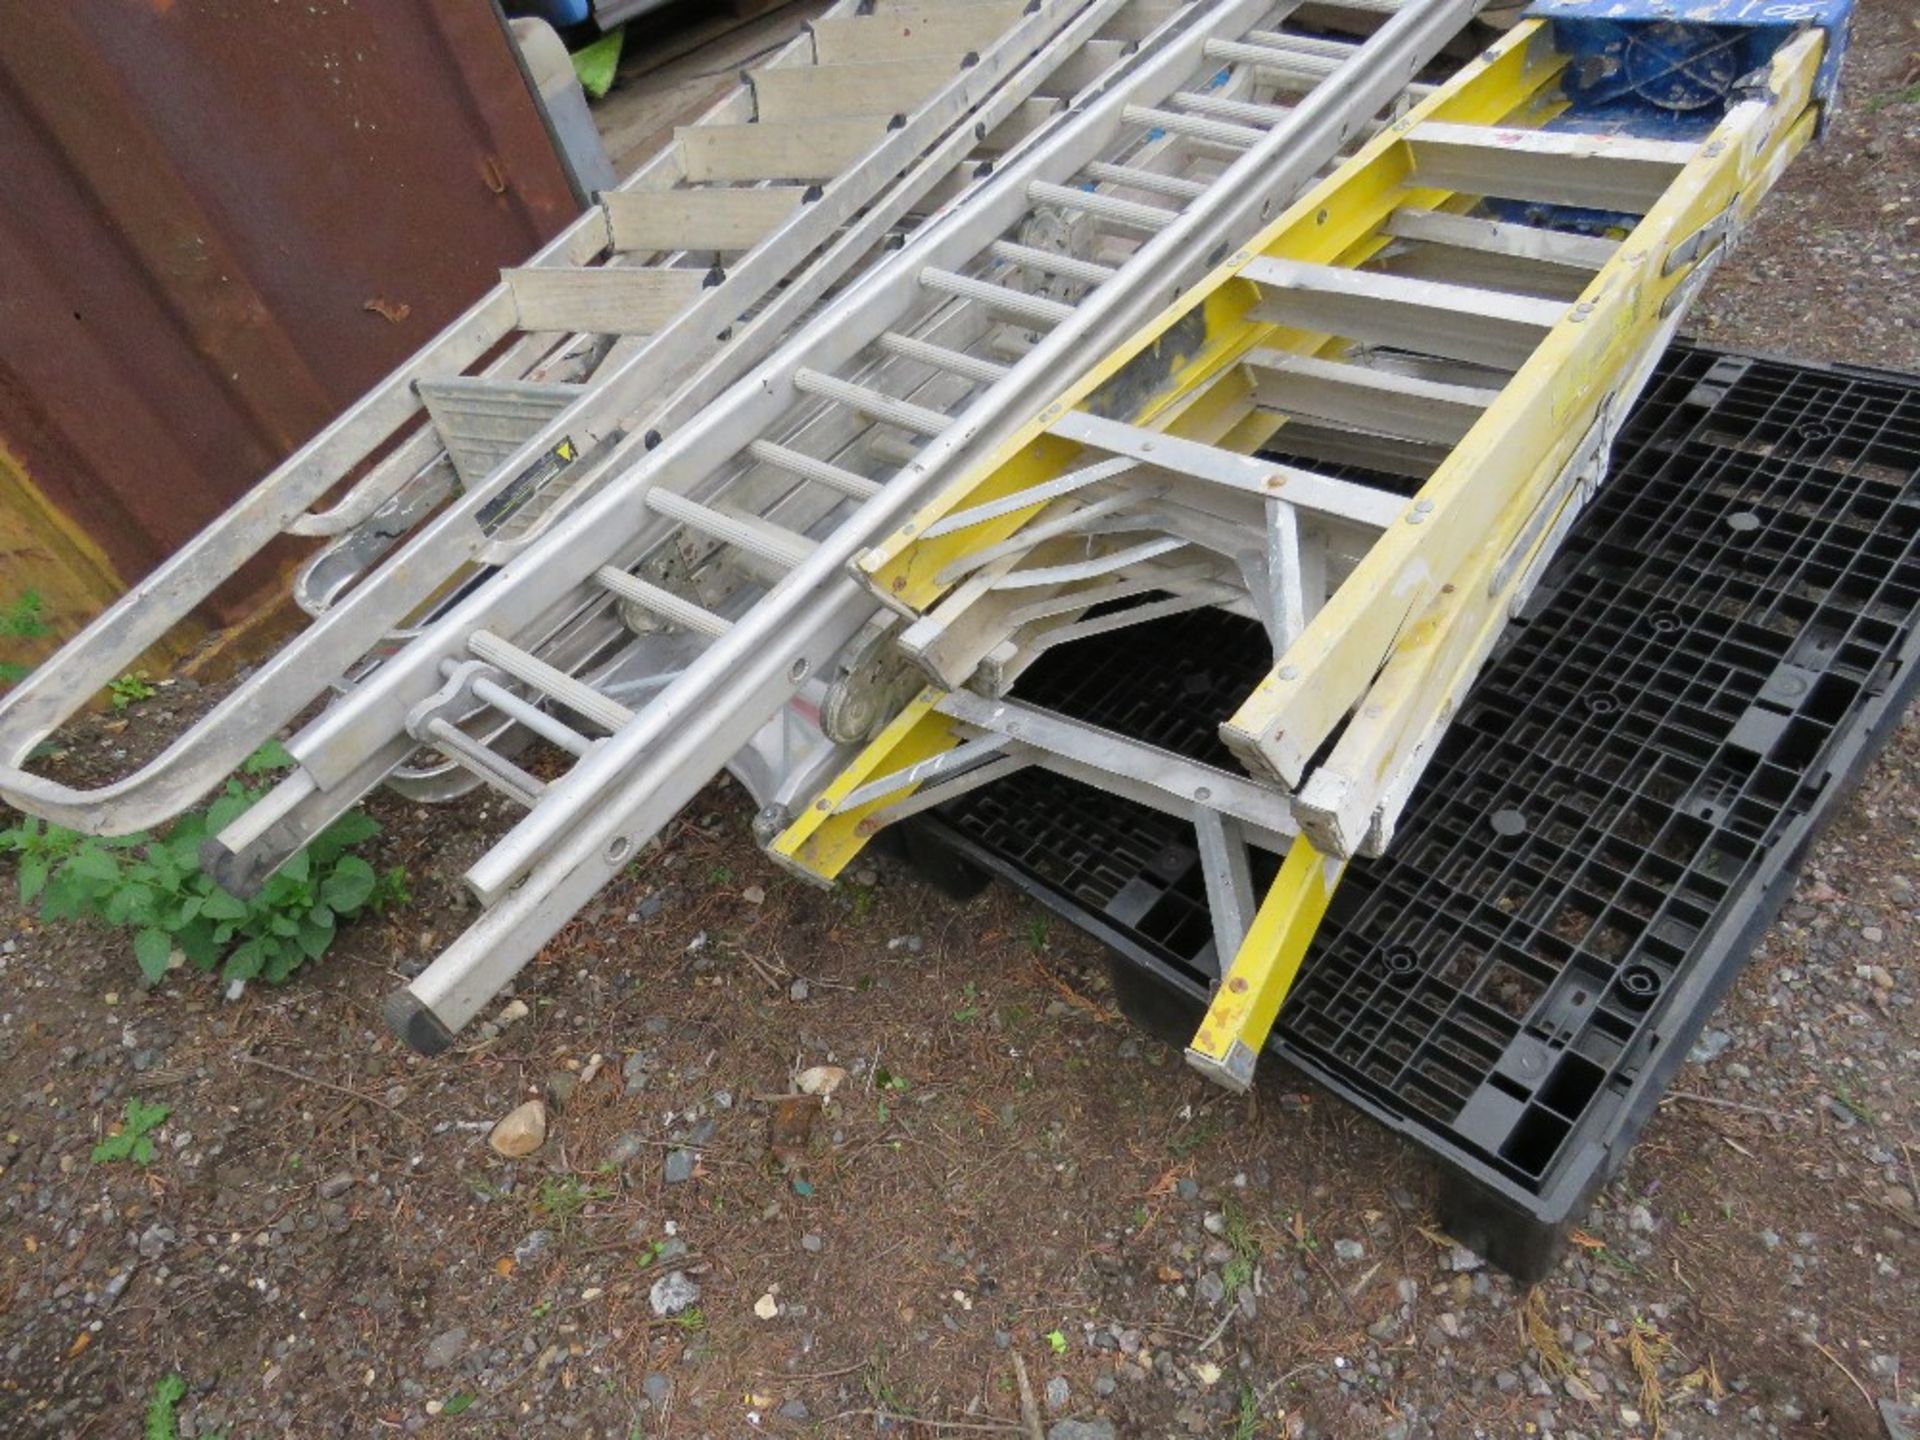 3 X GRP STEP LADDERS PLUS 7 X ALUMINIUM STEPS AND LADDERS. - Image 5 of 5